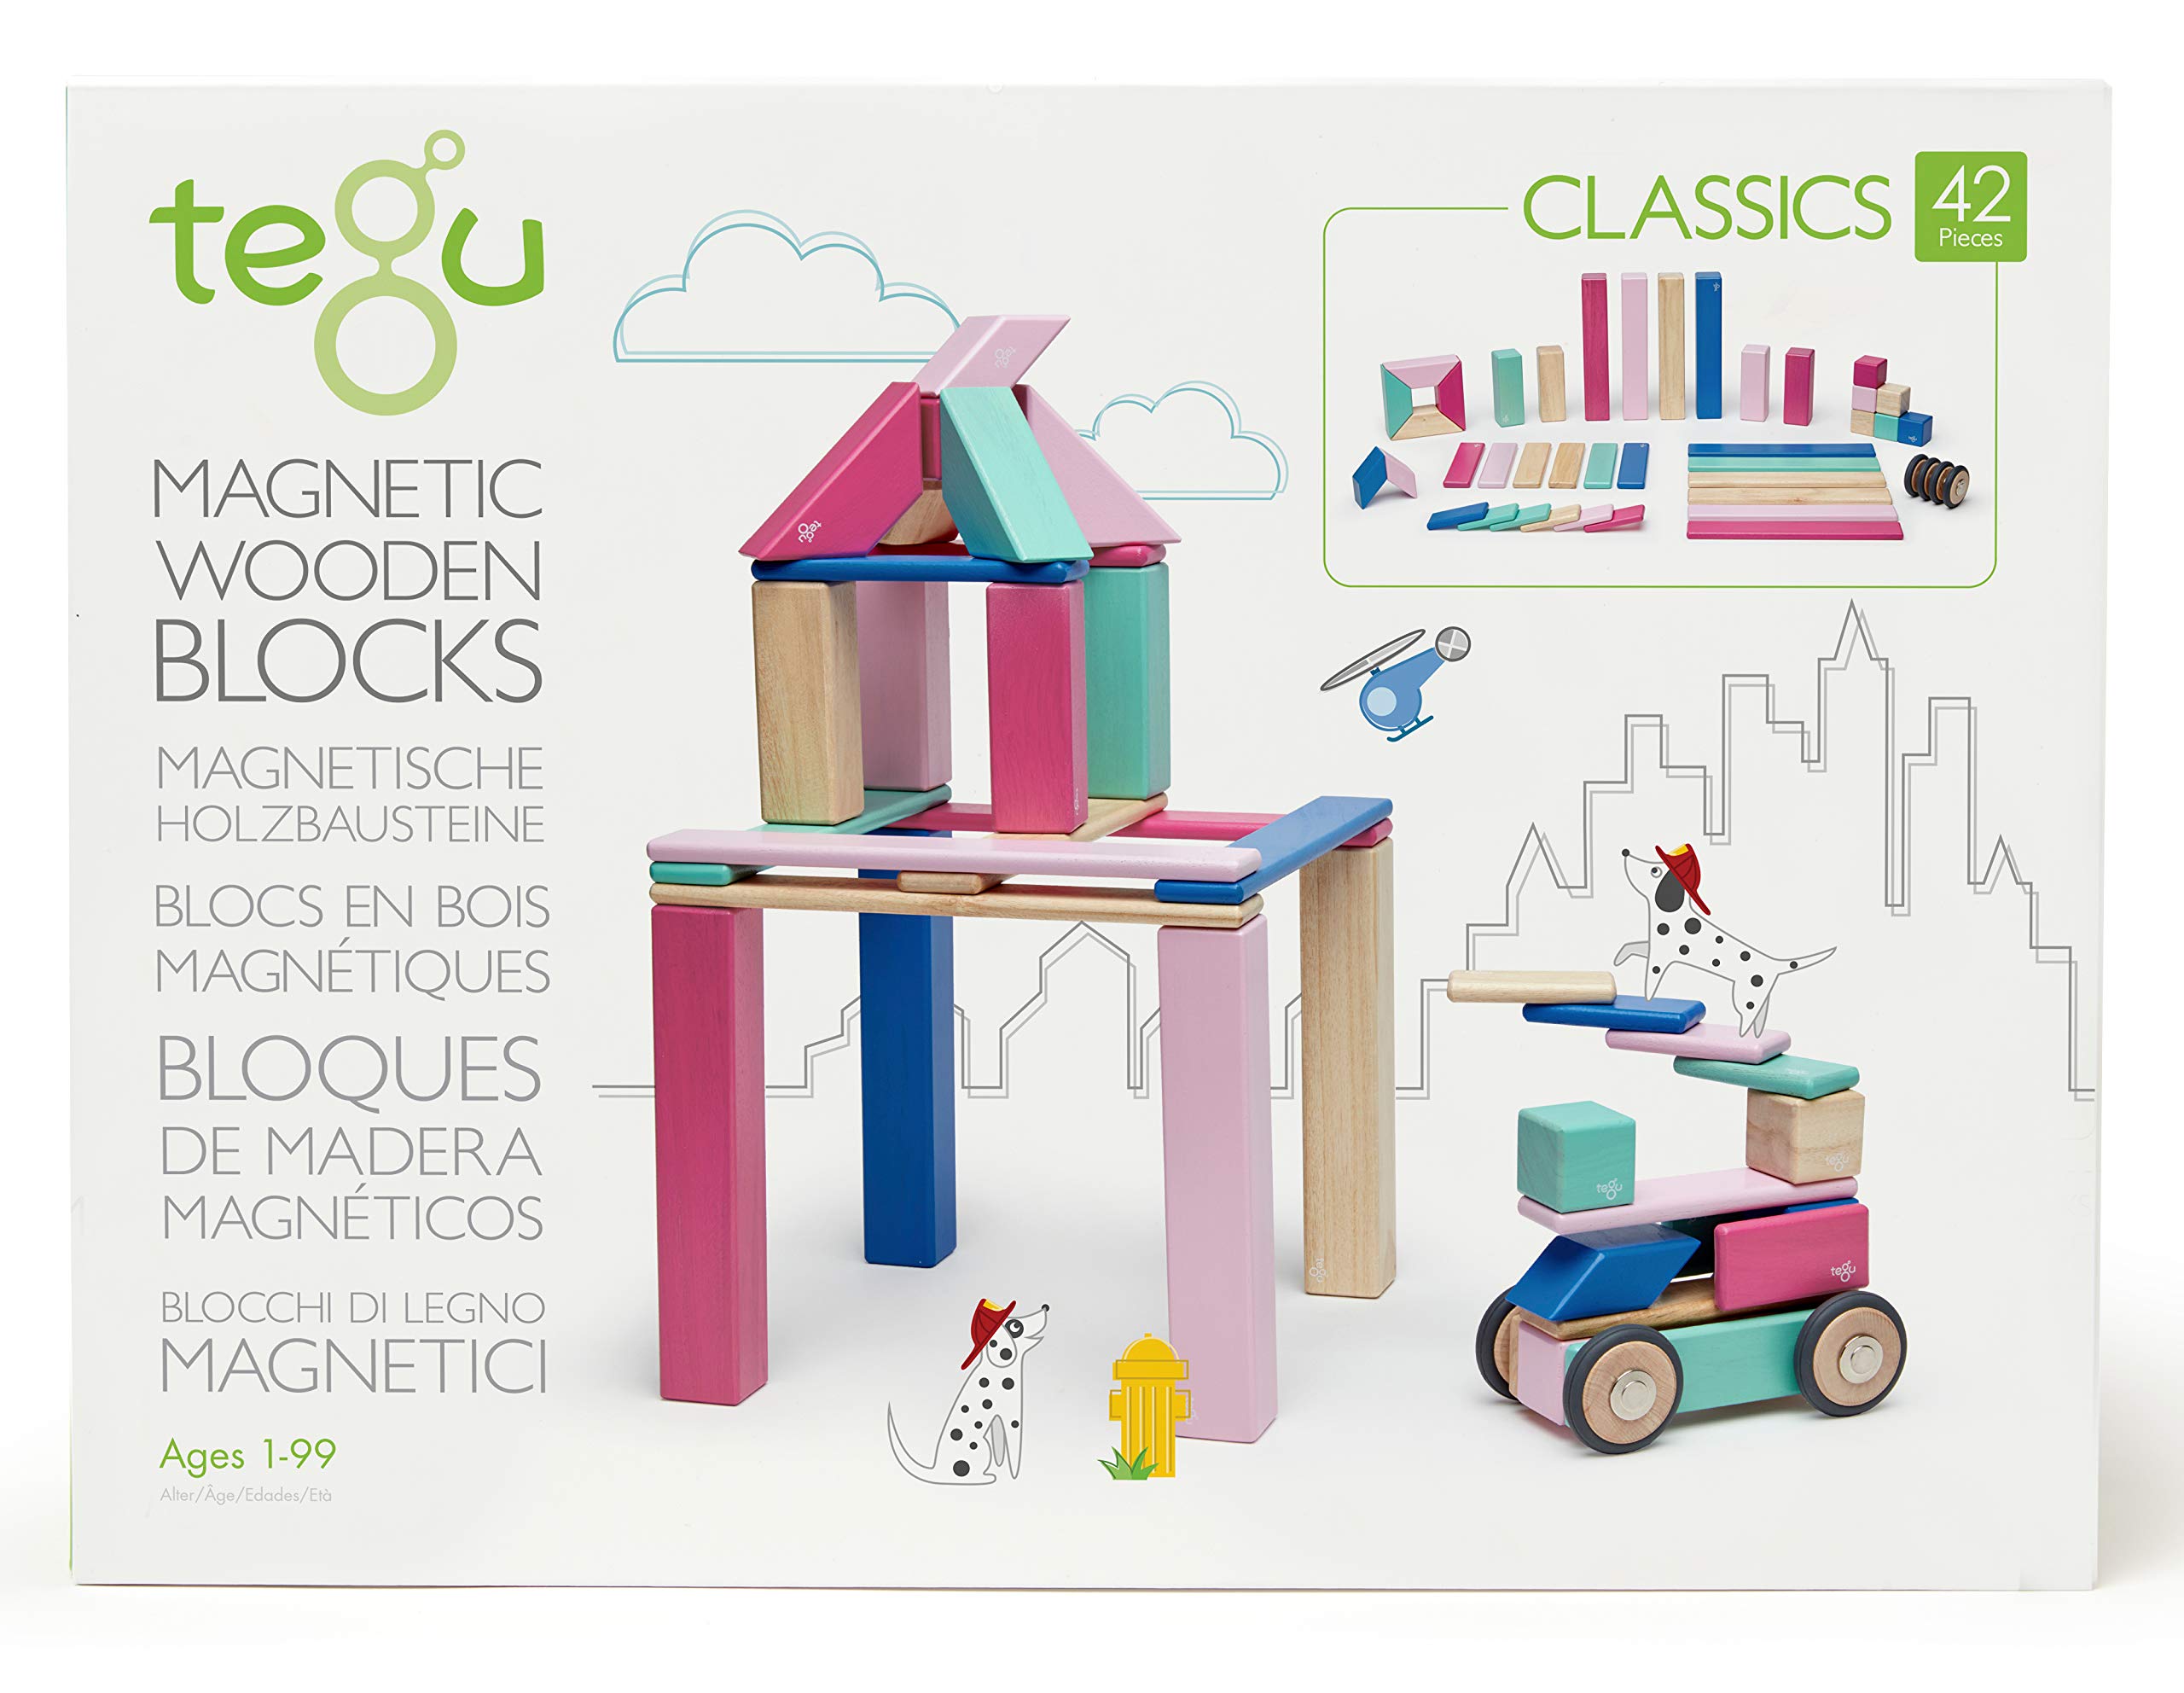 42 Piece Tegu Magnetic Wooden Block Set, Blossom, 1-99 years old